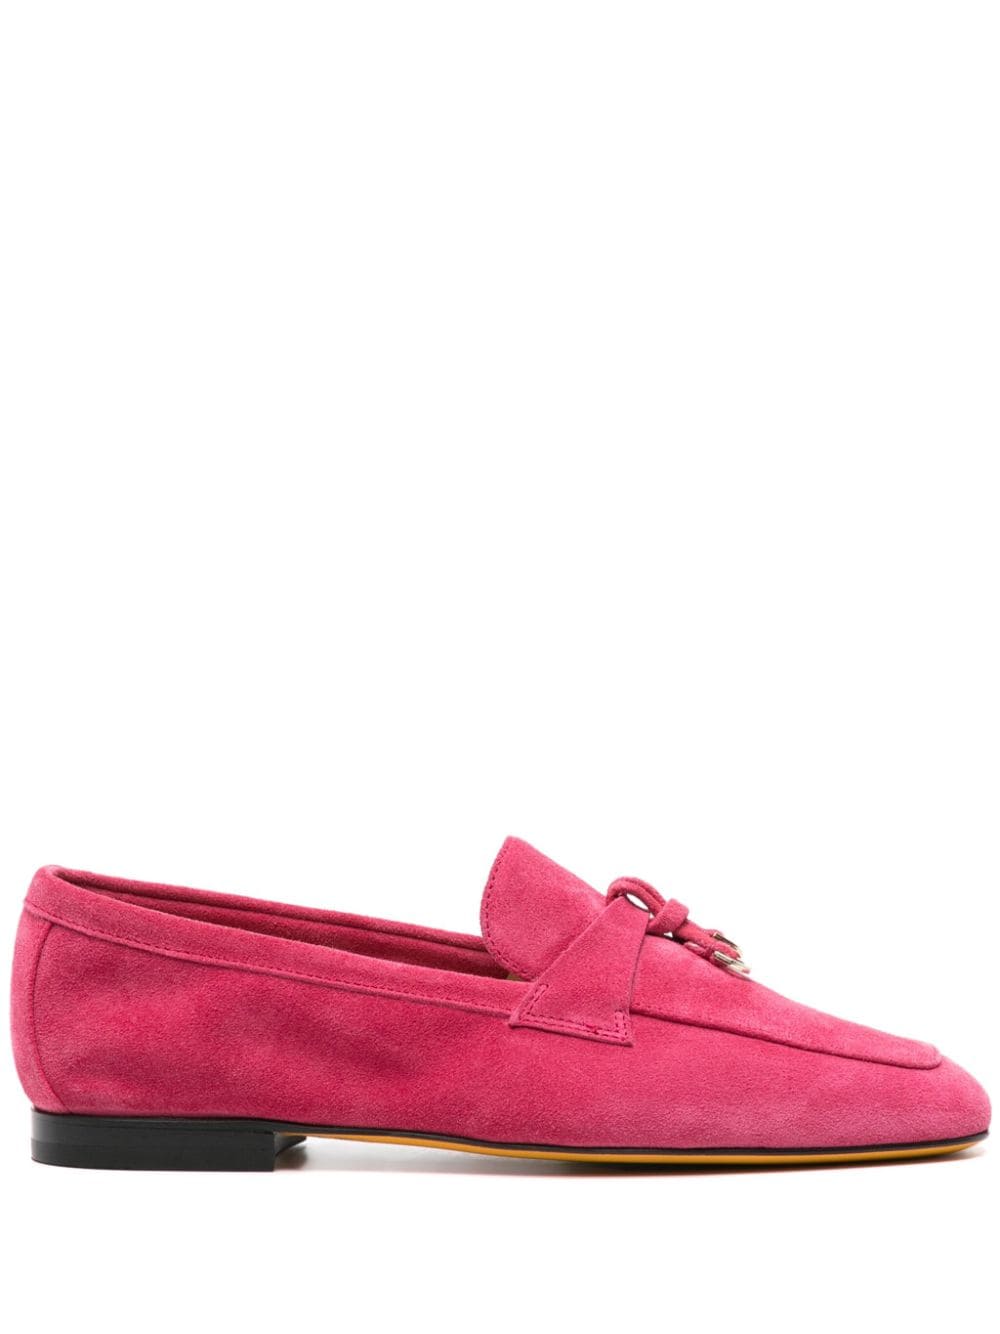 Doucal's tassel-detailed suede loafers - Pink von Doucal's